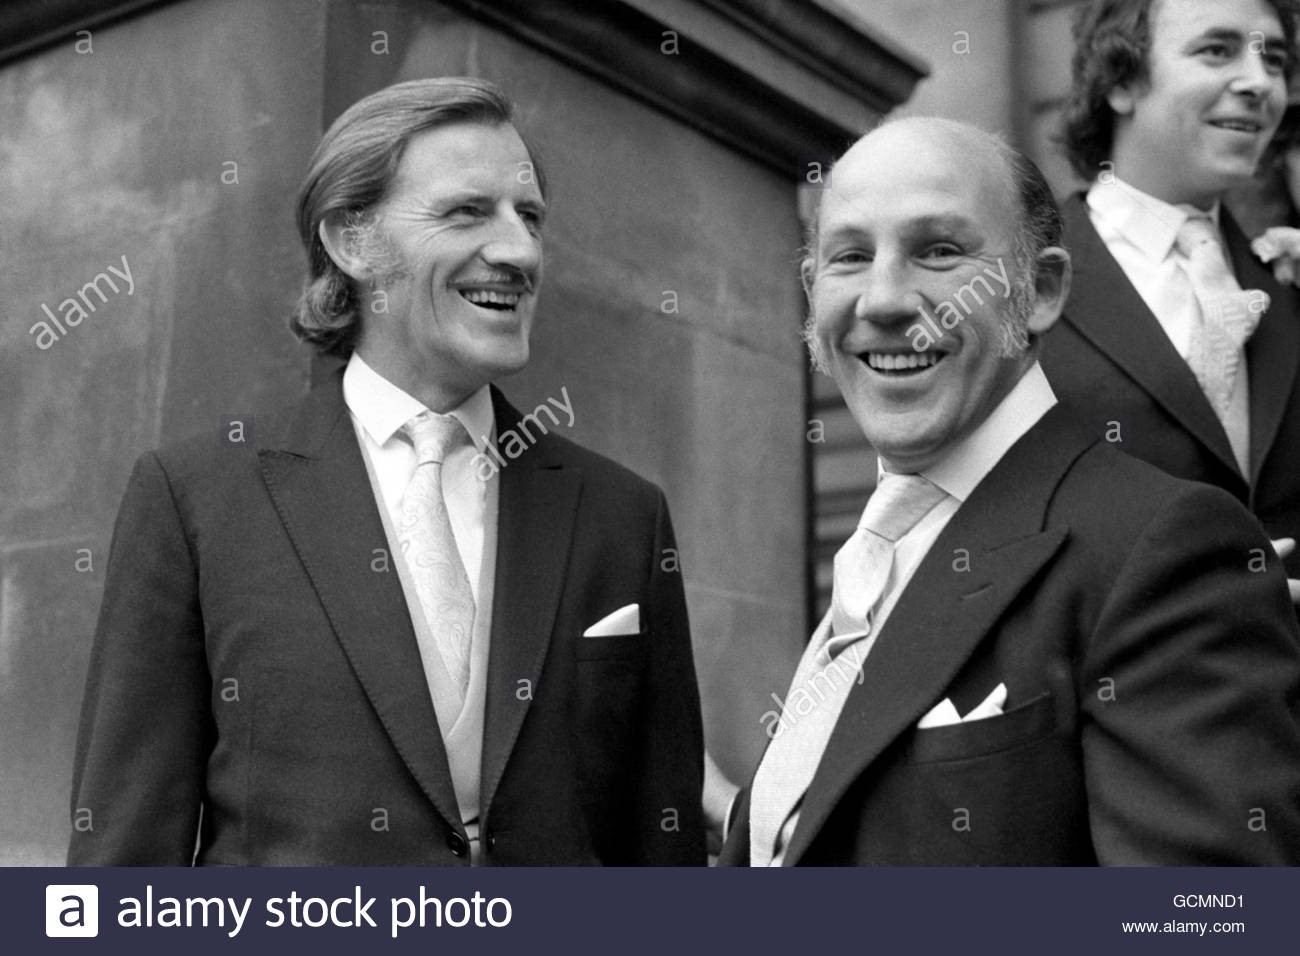 19 October 1974. Graham Hill (l) and Stirling Moss attend the wedding of another British driver, James Hunt. Hunt wed to model Suzy Miller at Brompton Oratory, London.